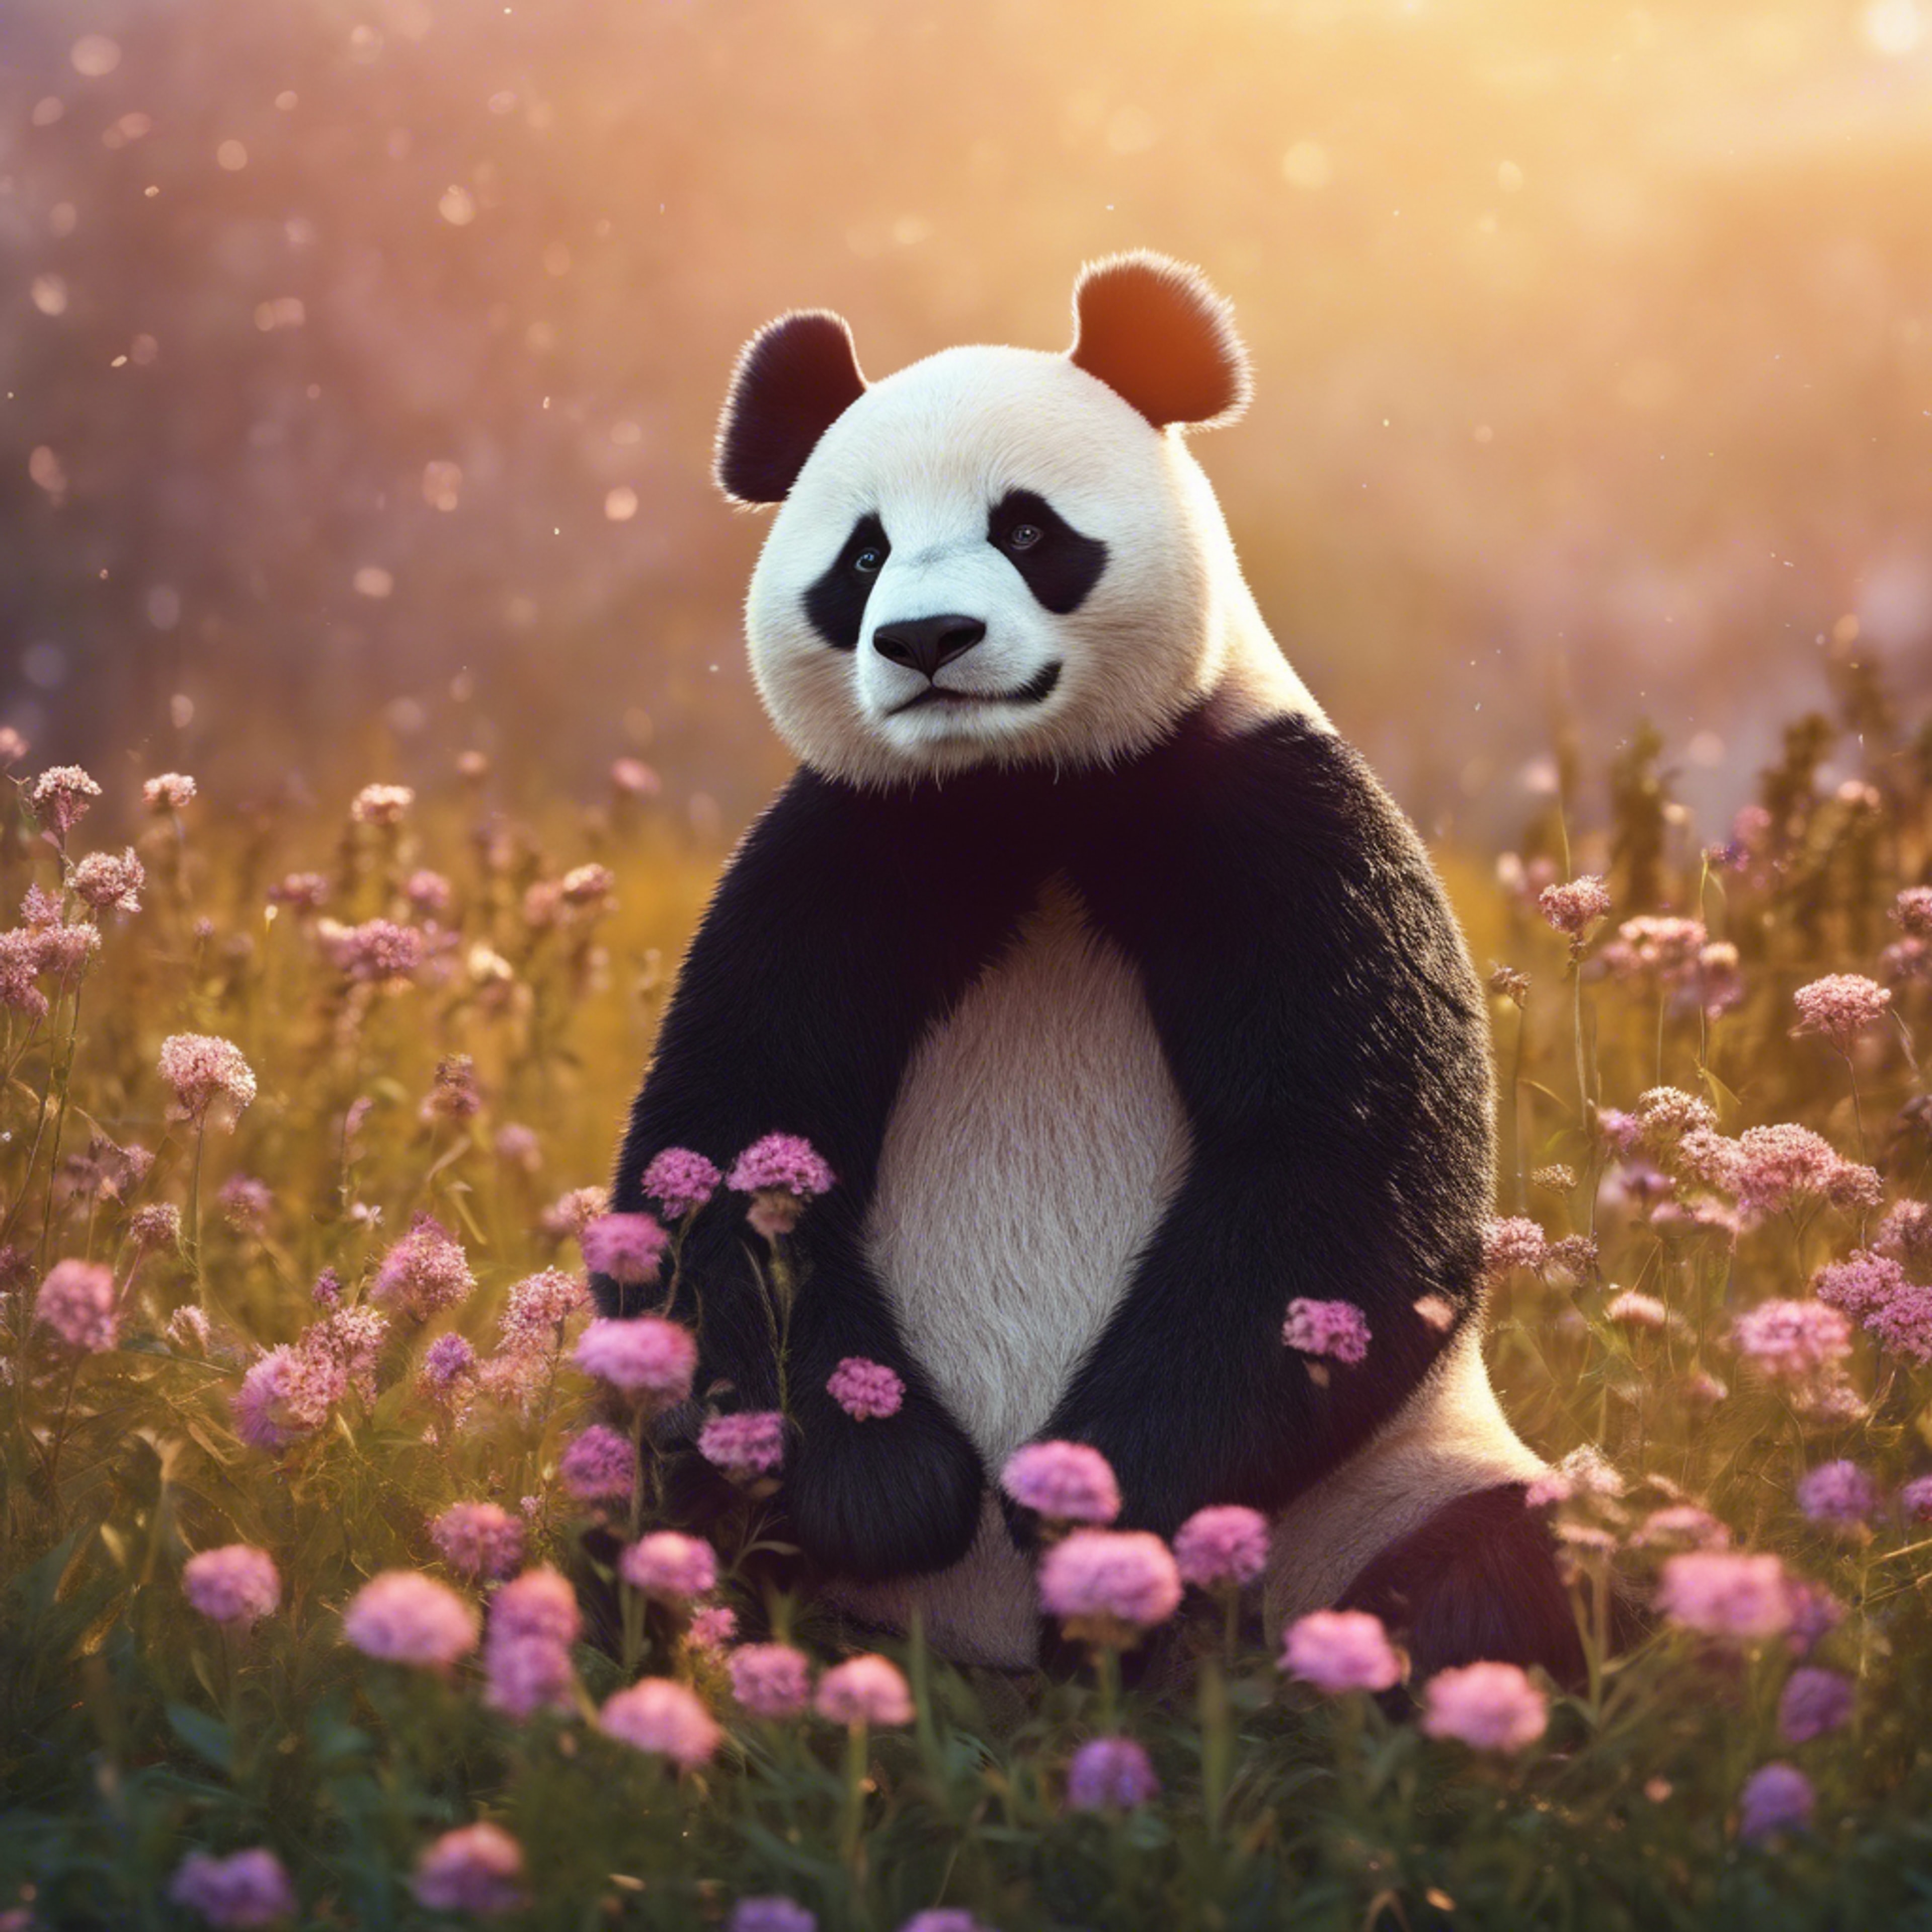 Beautiful illustration of a panda relaxing under the glow of the setting sun, surrounded by a field of wildflowers. Ταπετσαρία[4e88d1ee586942fa837d]